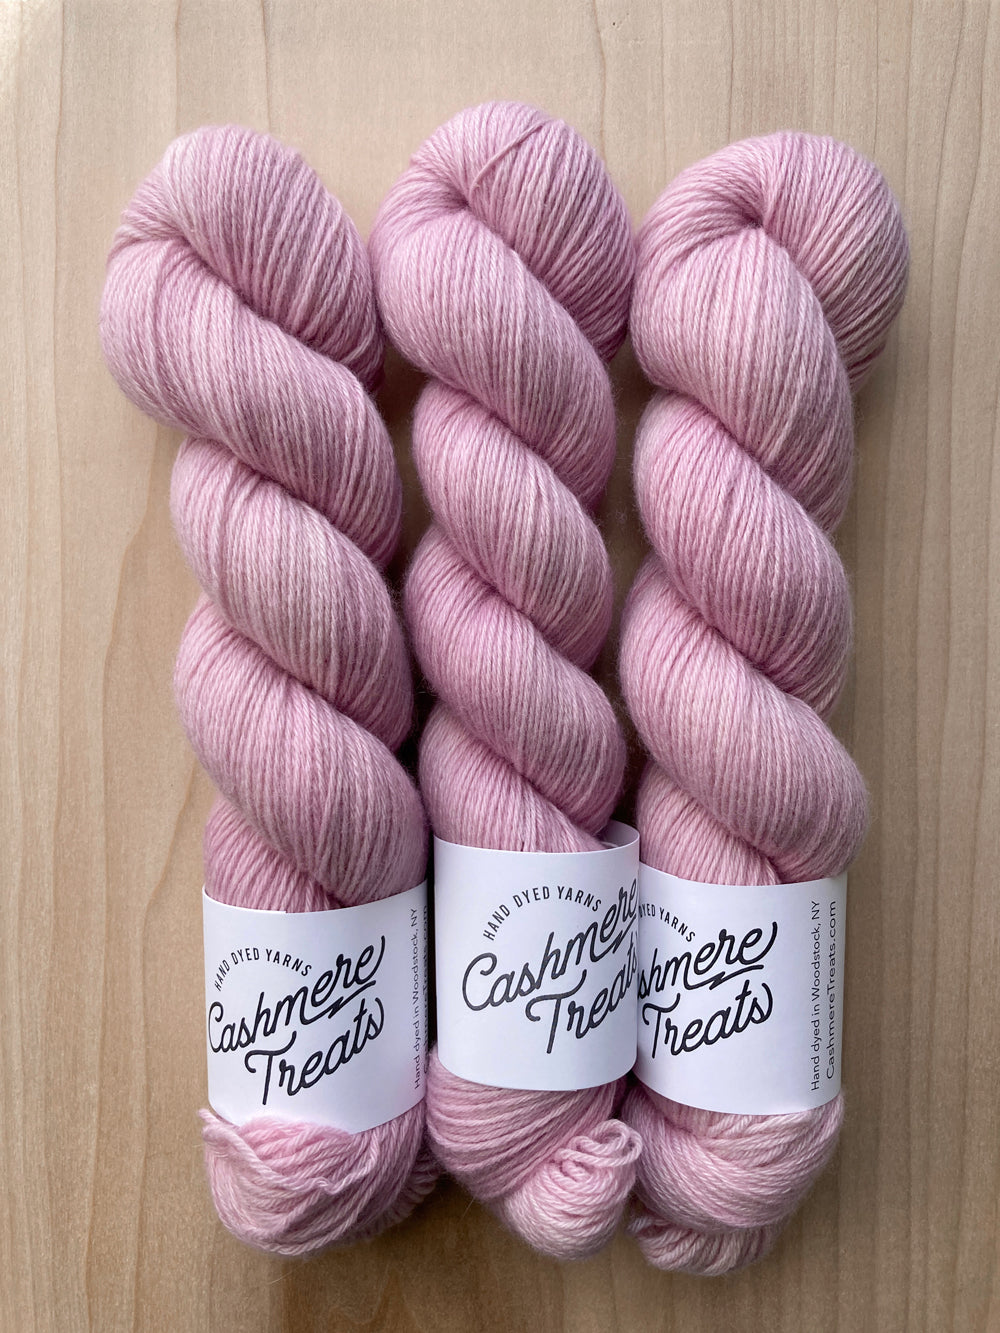 100% Cashmere Yarn for Knitting - Search Shopping